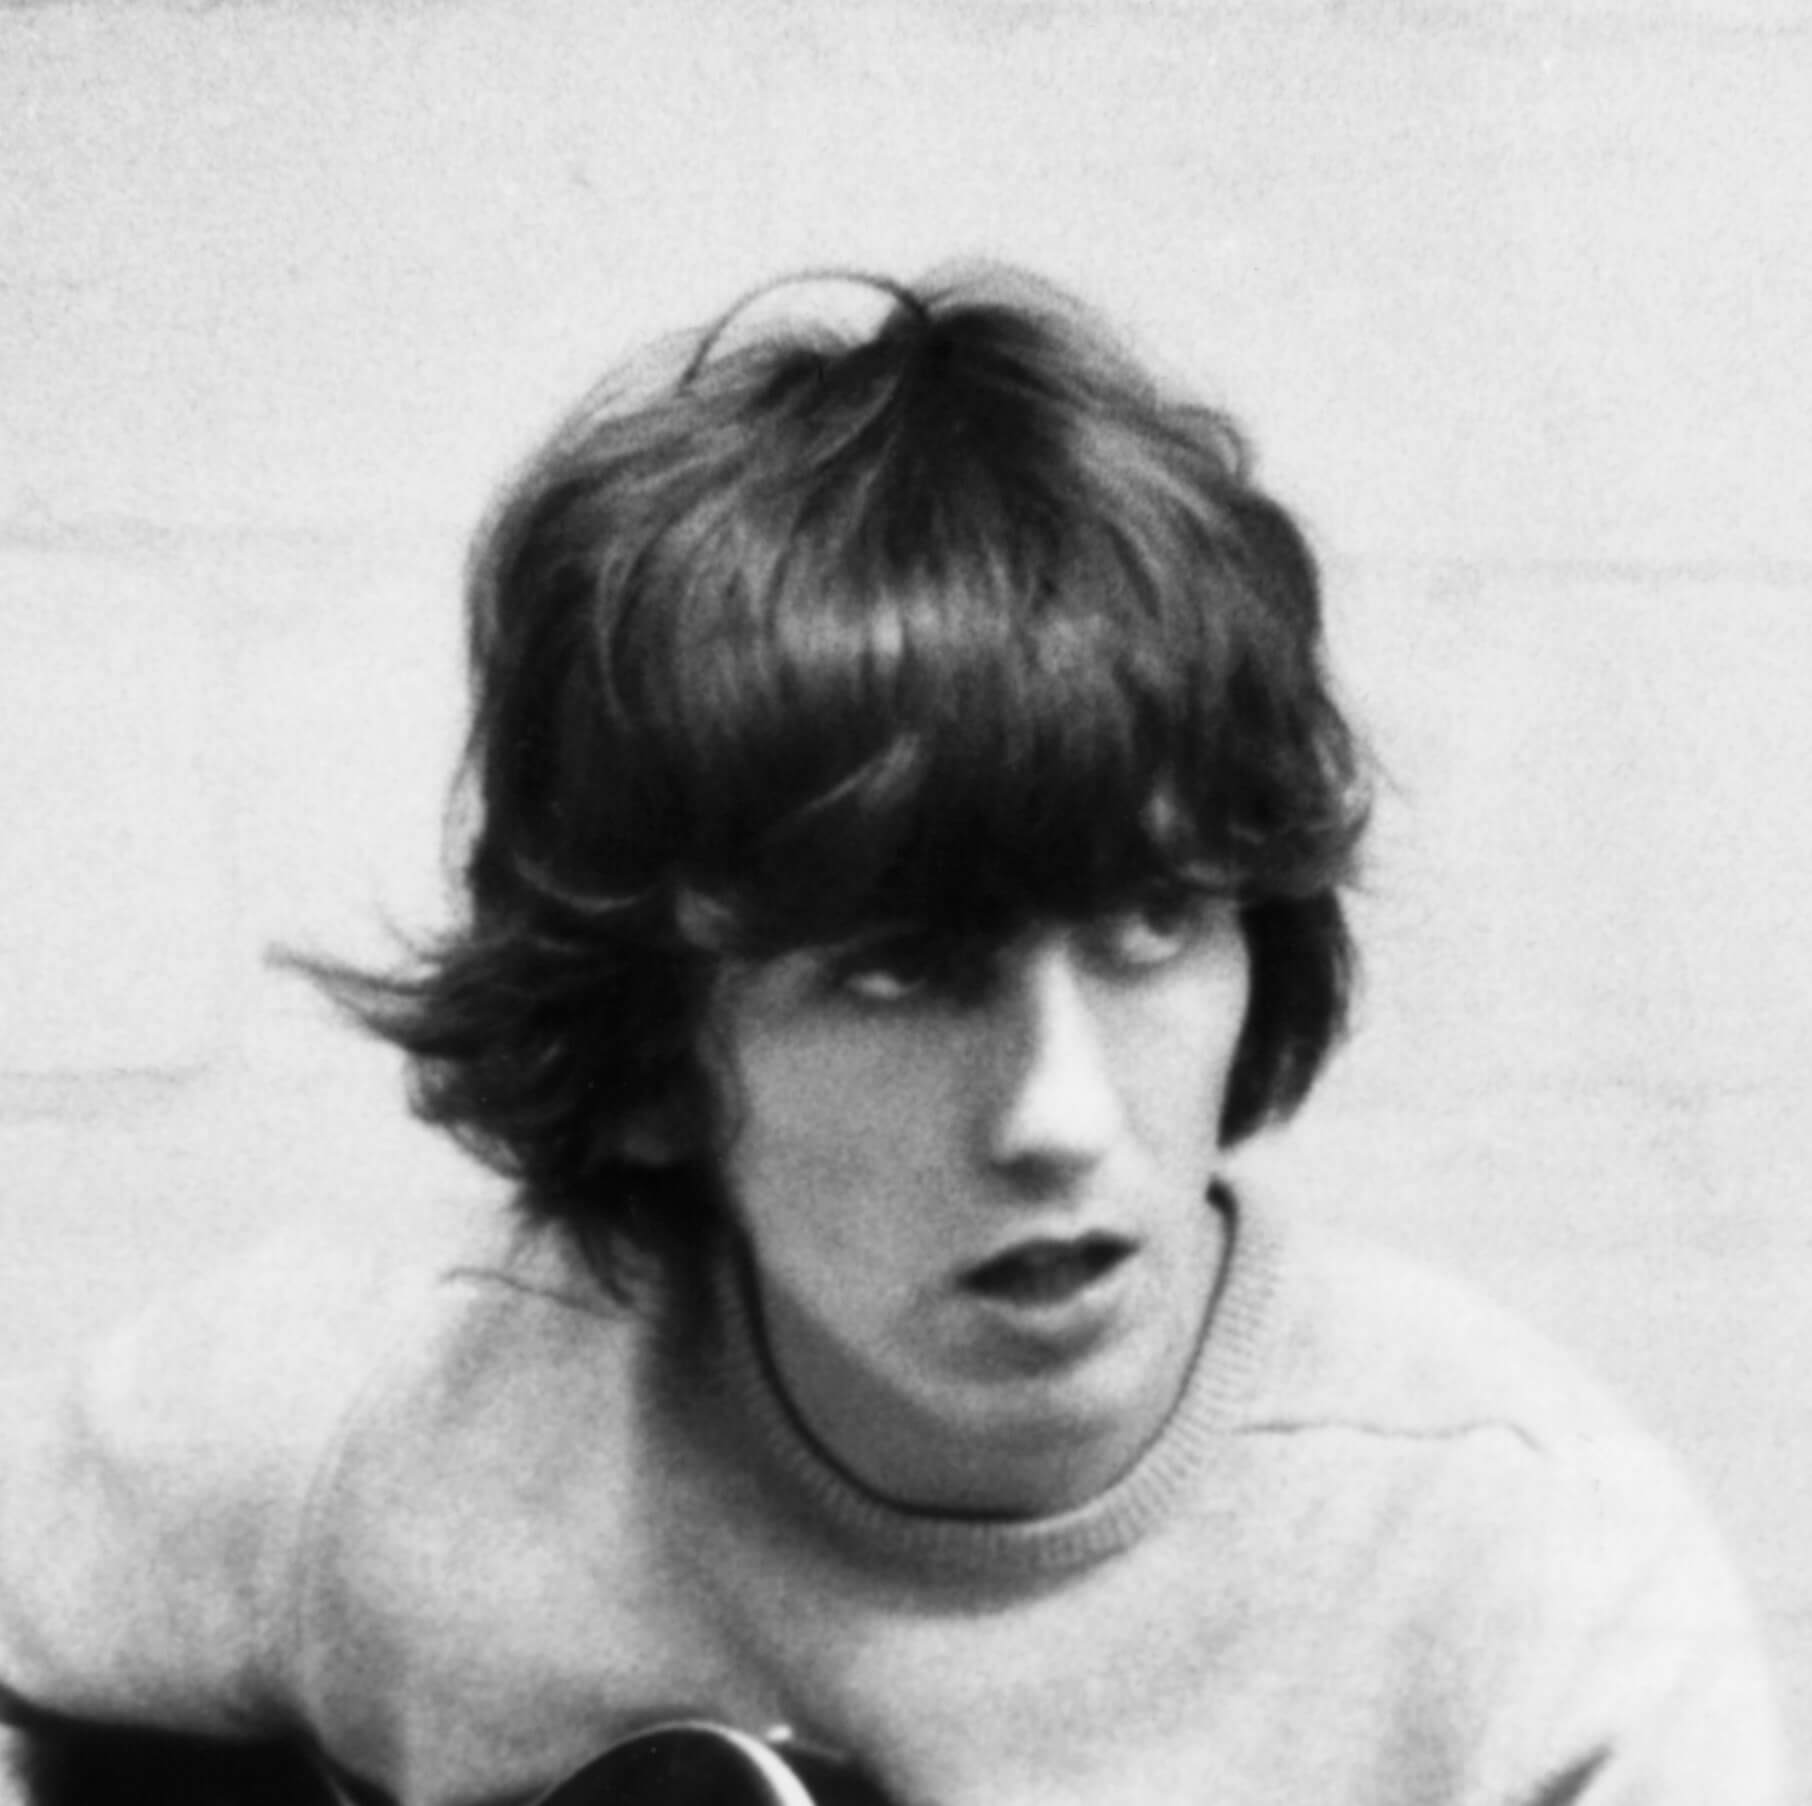 'All Things Must Pass' star George Harrison in black-and-white